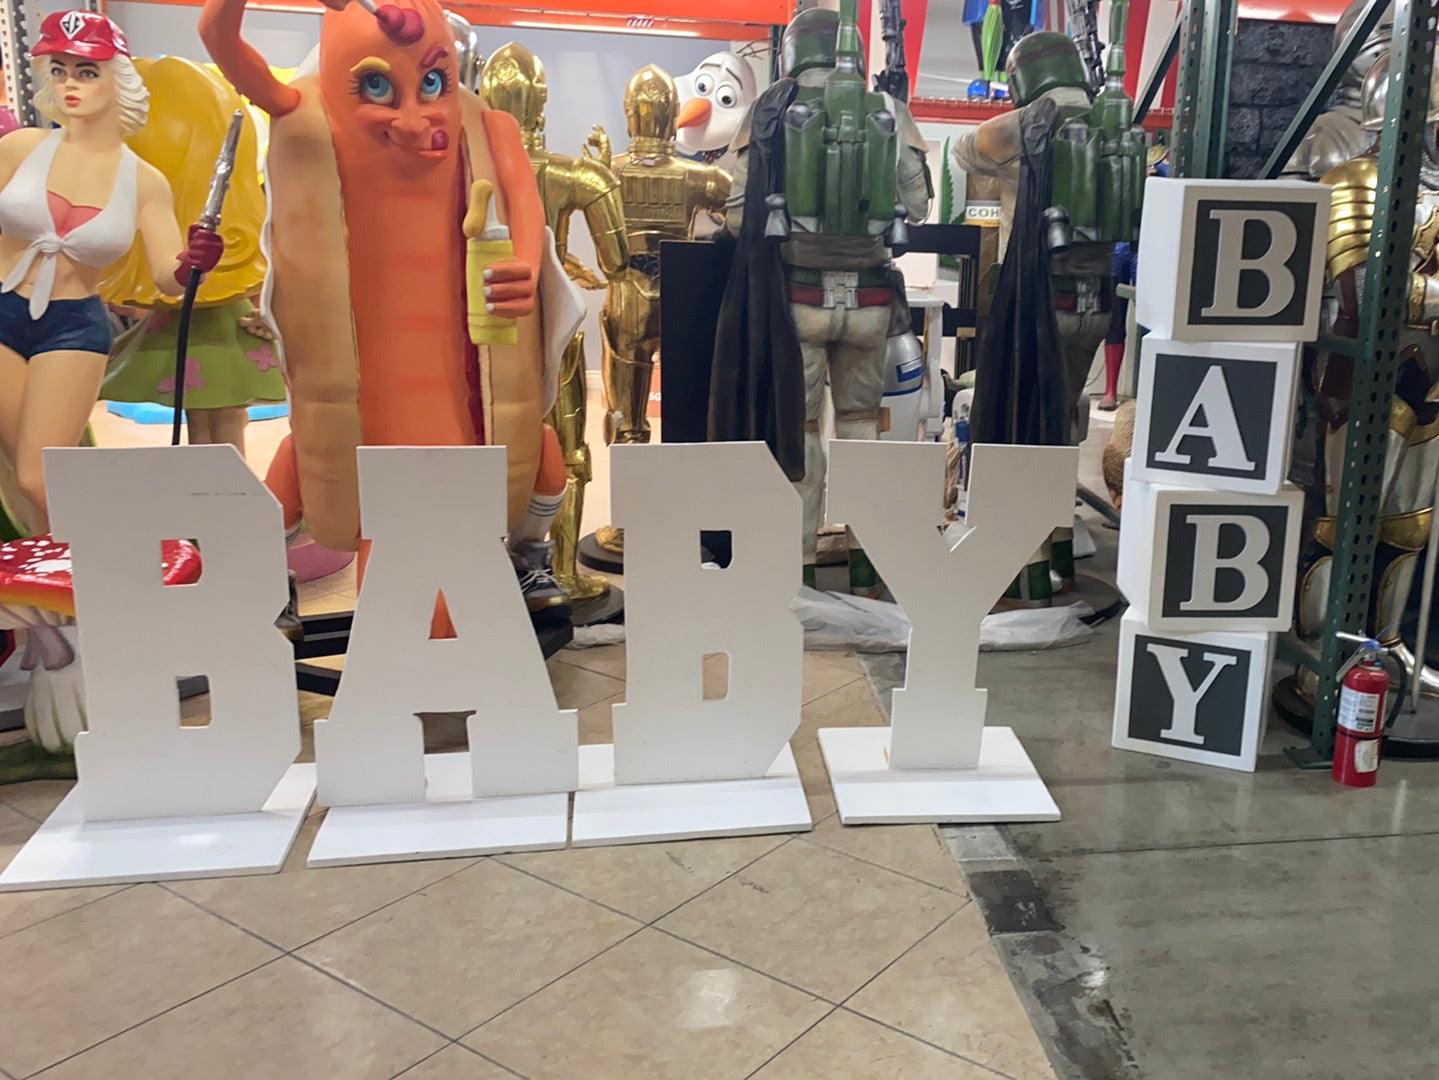 Giant BABY Letters Over Size Statue